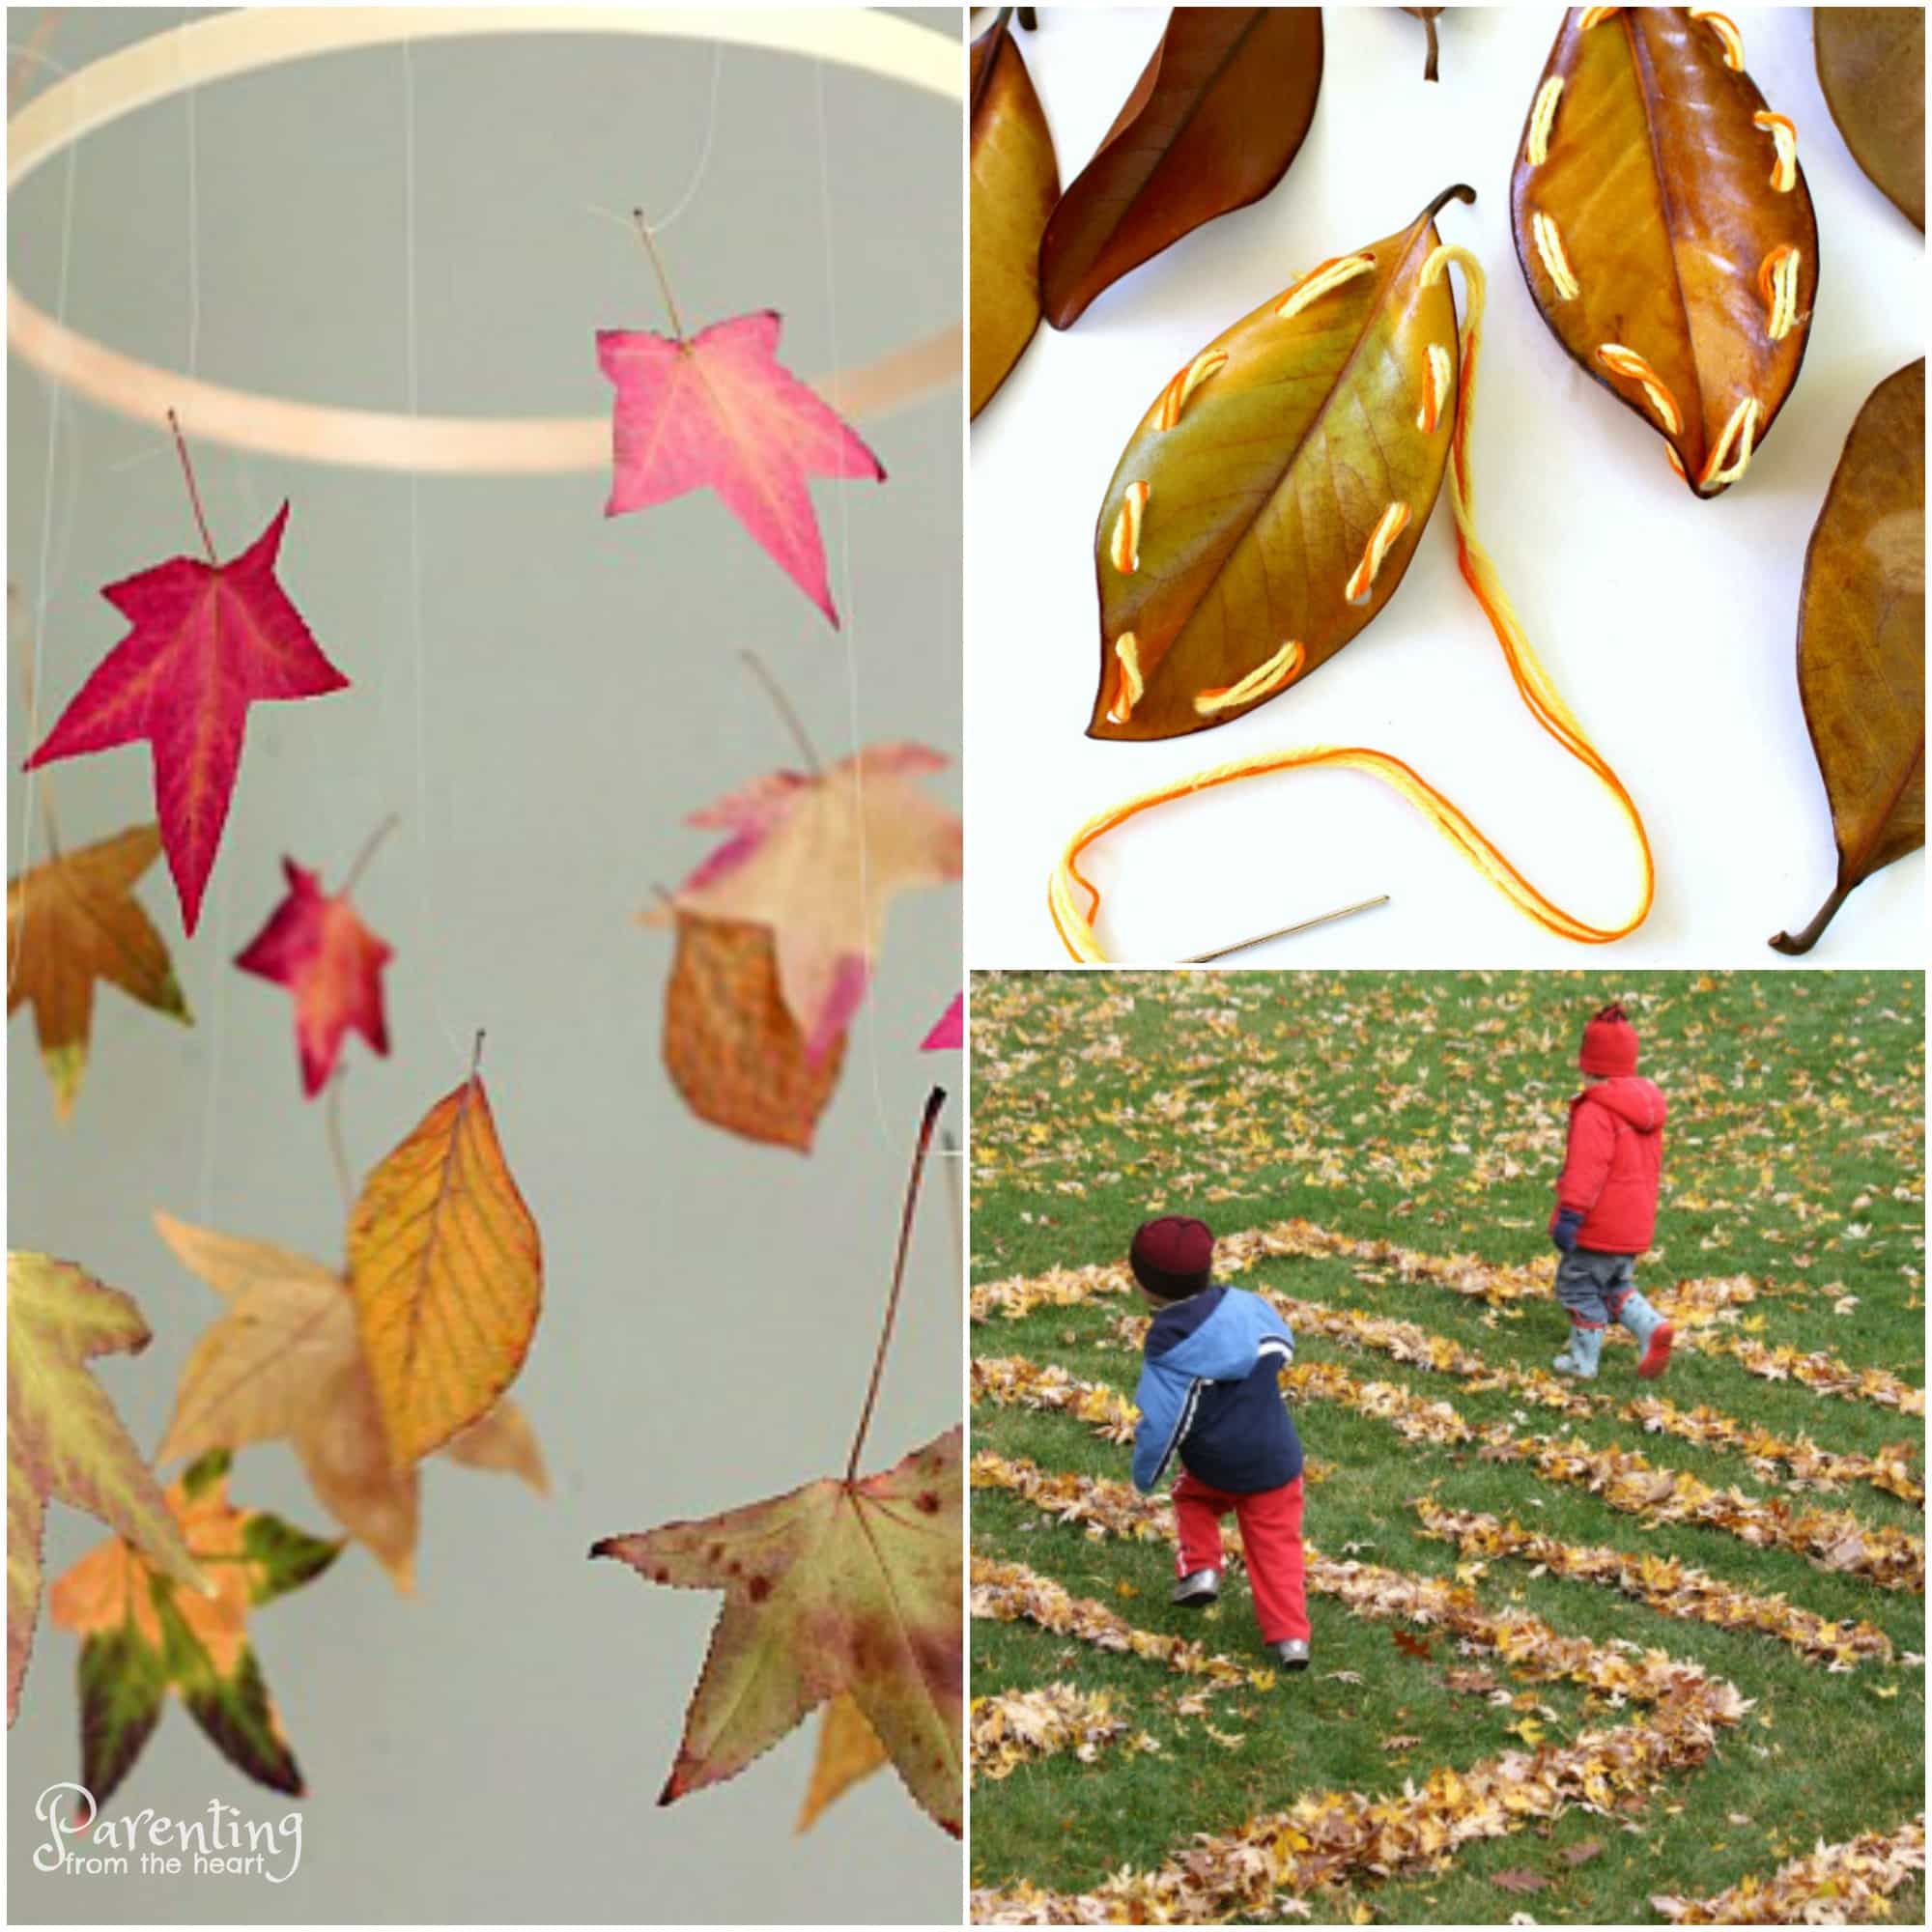 Gorgeous Fall Crafts for kids using leaves